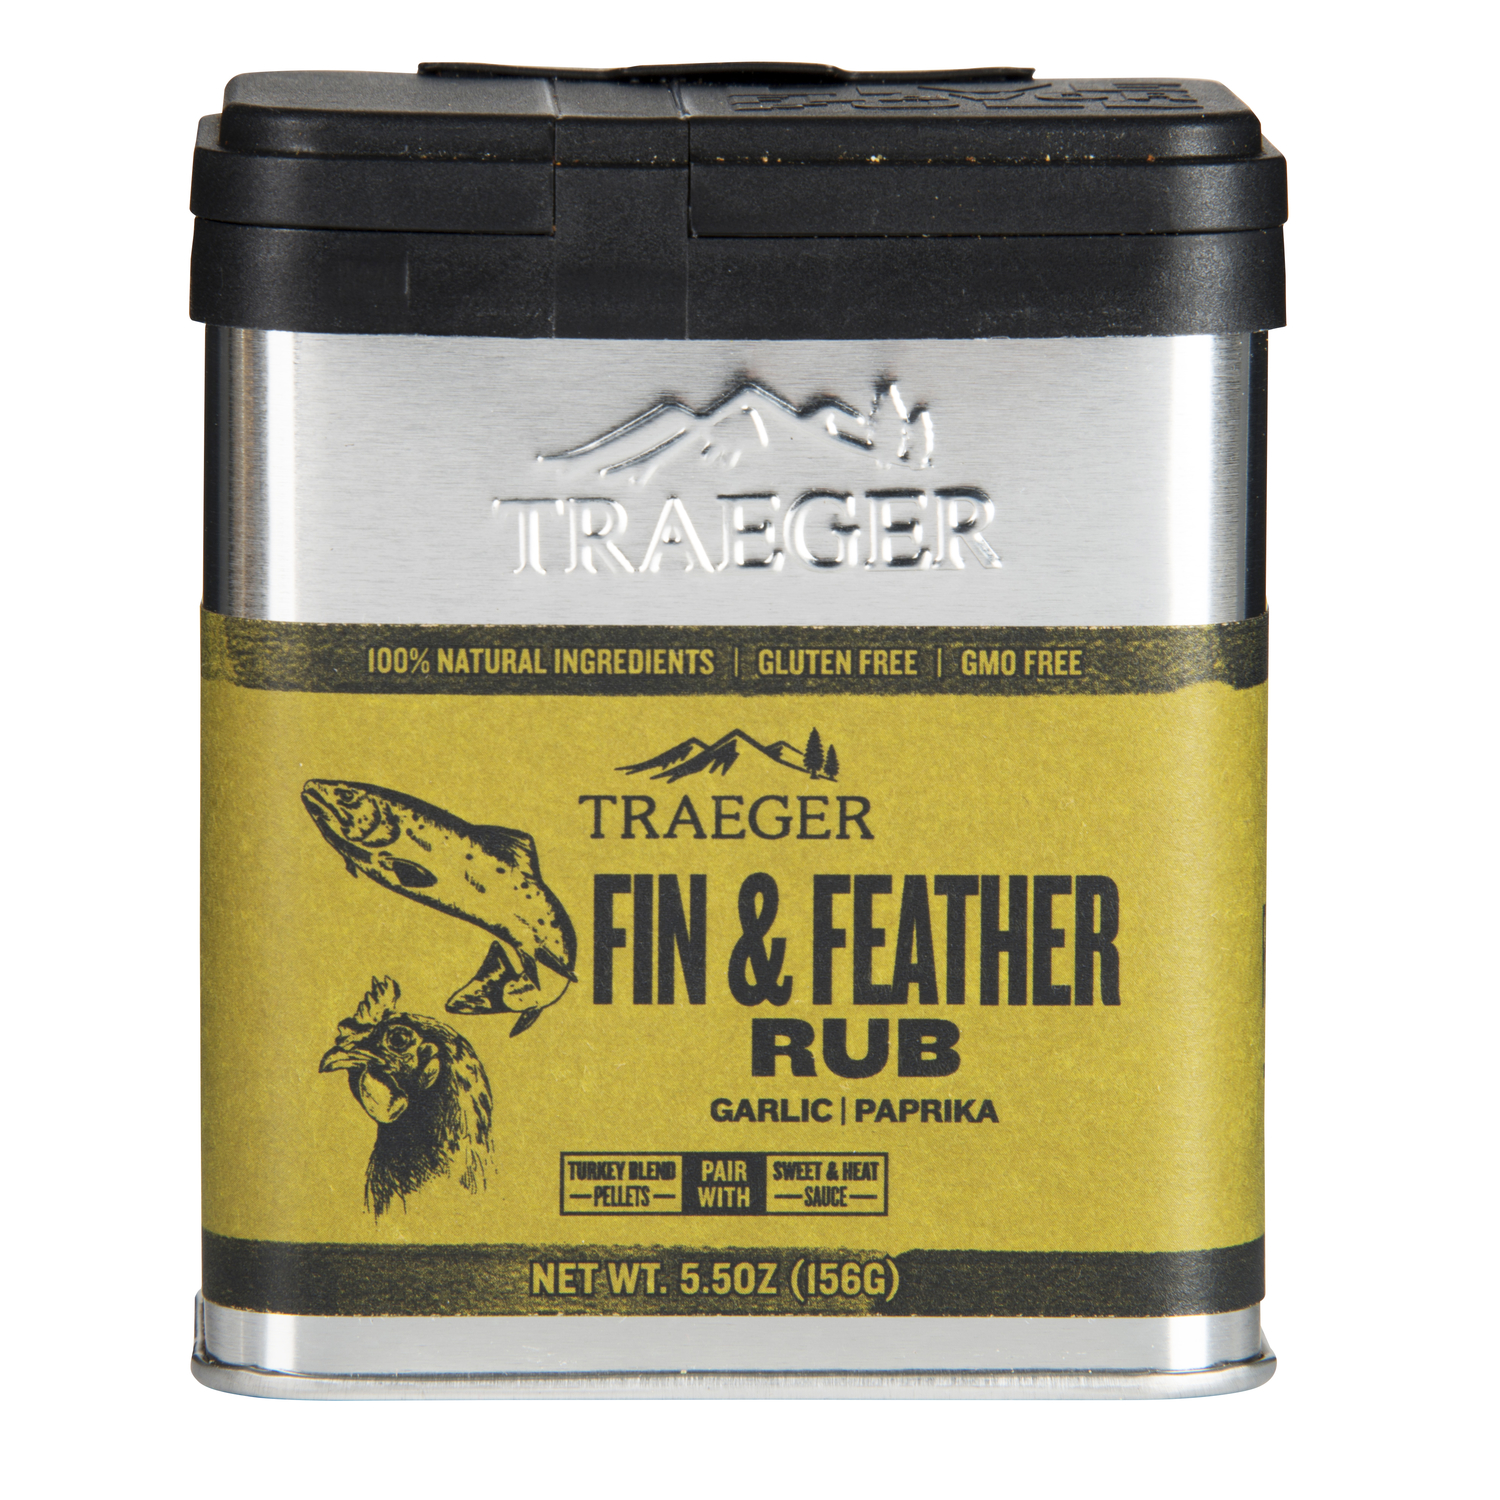 Traeger Garlic and Paprika Fin and Feather Rub 5.5 oz.